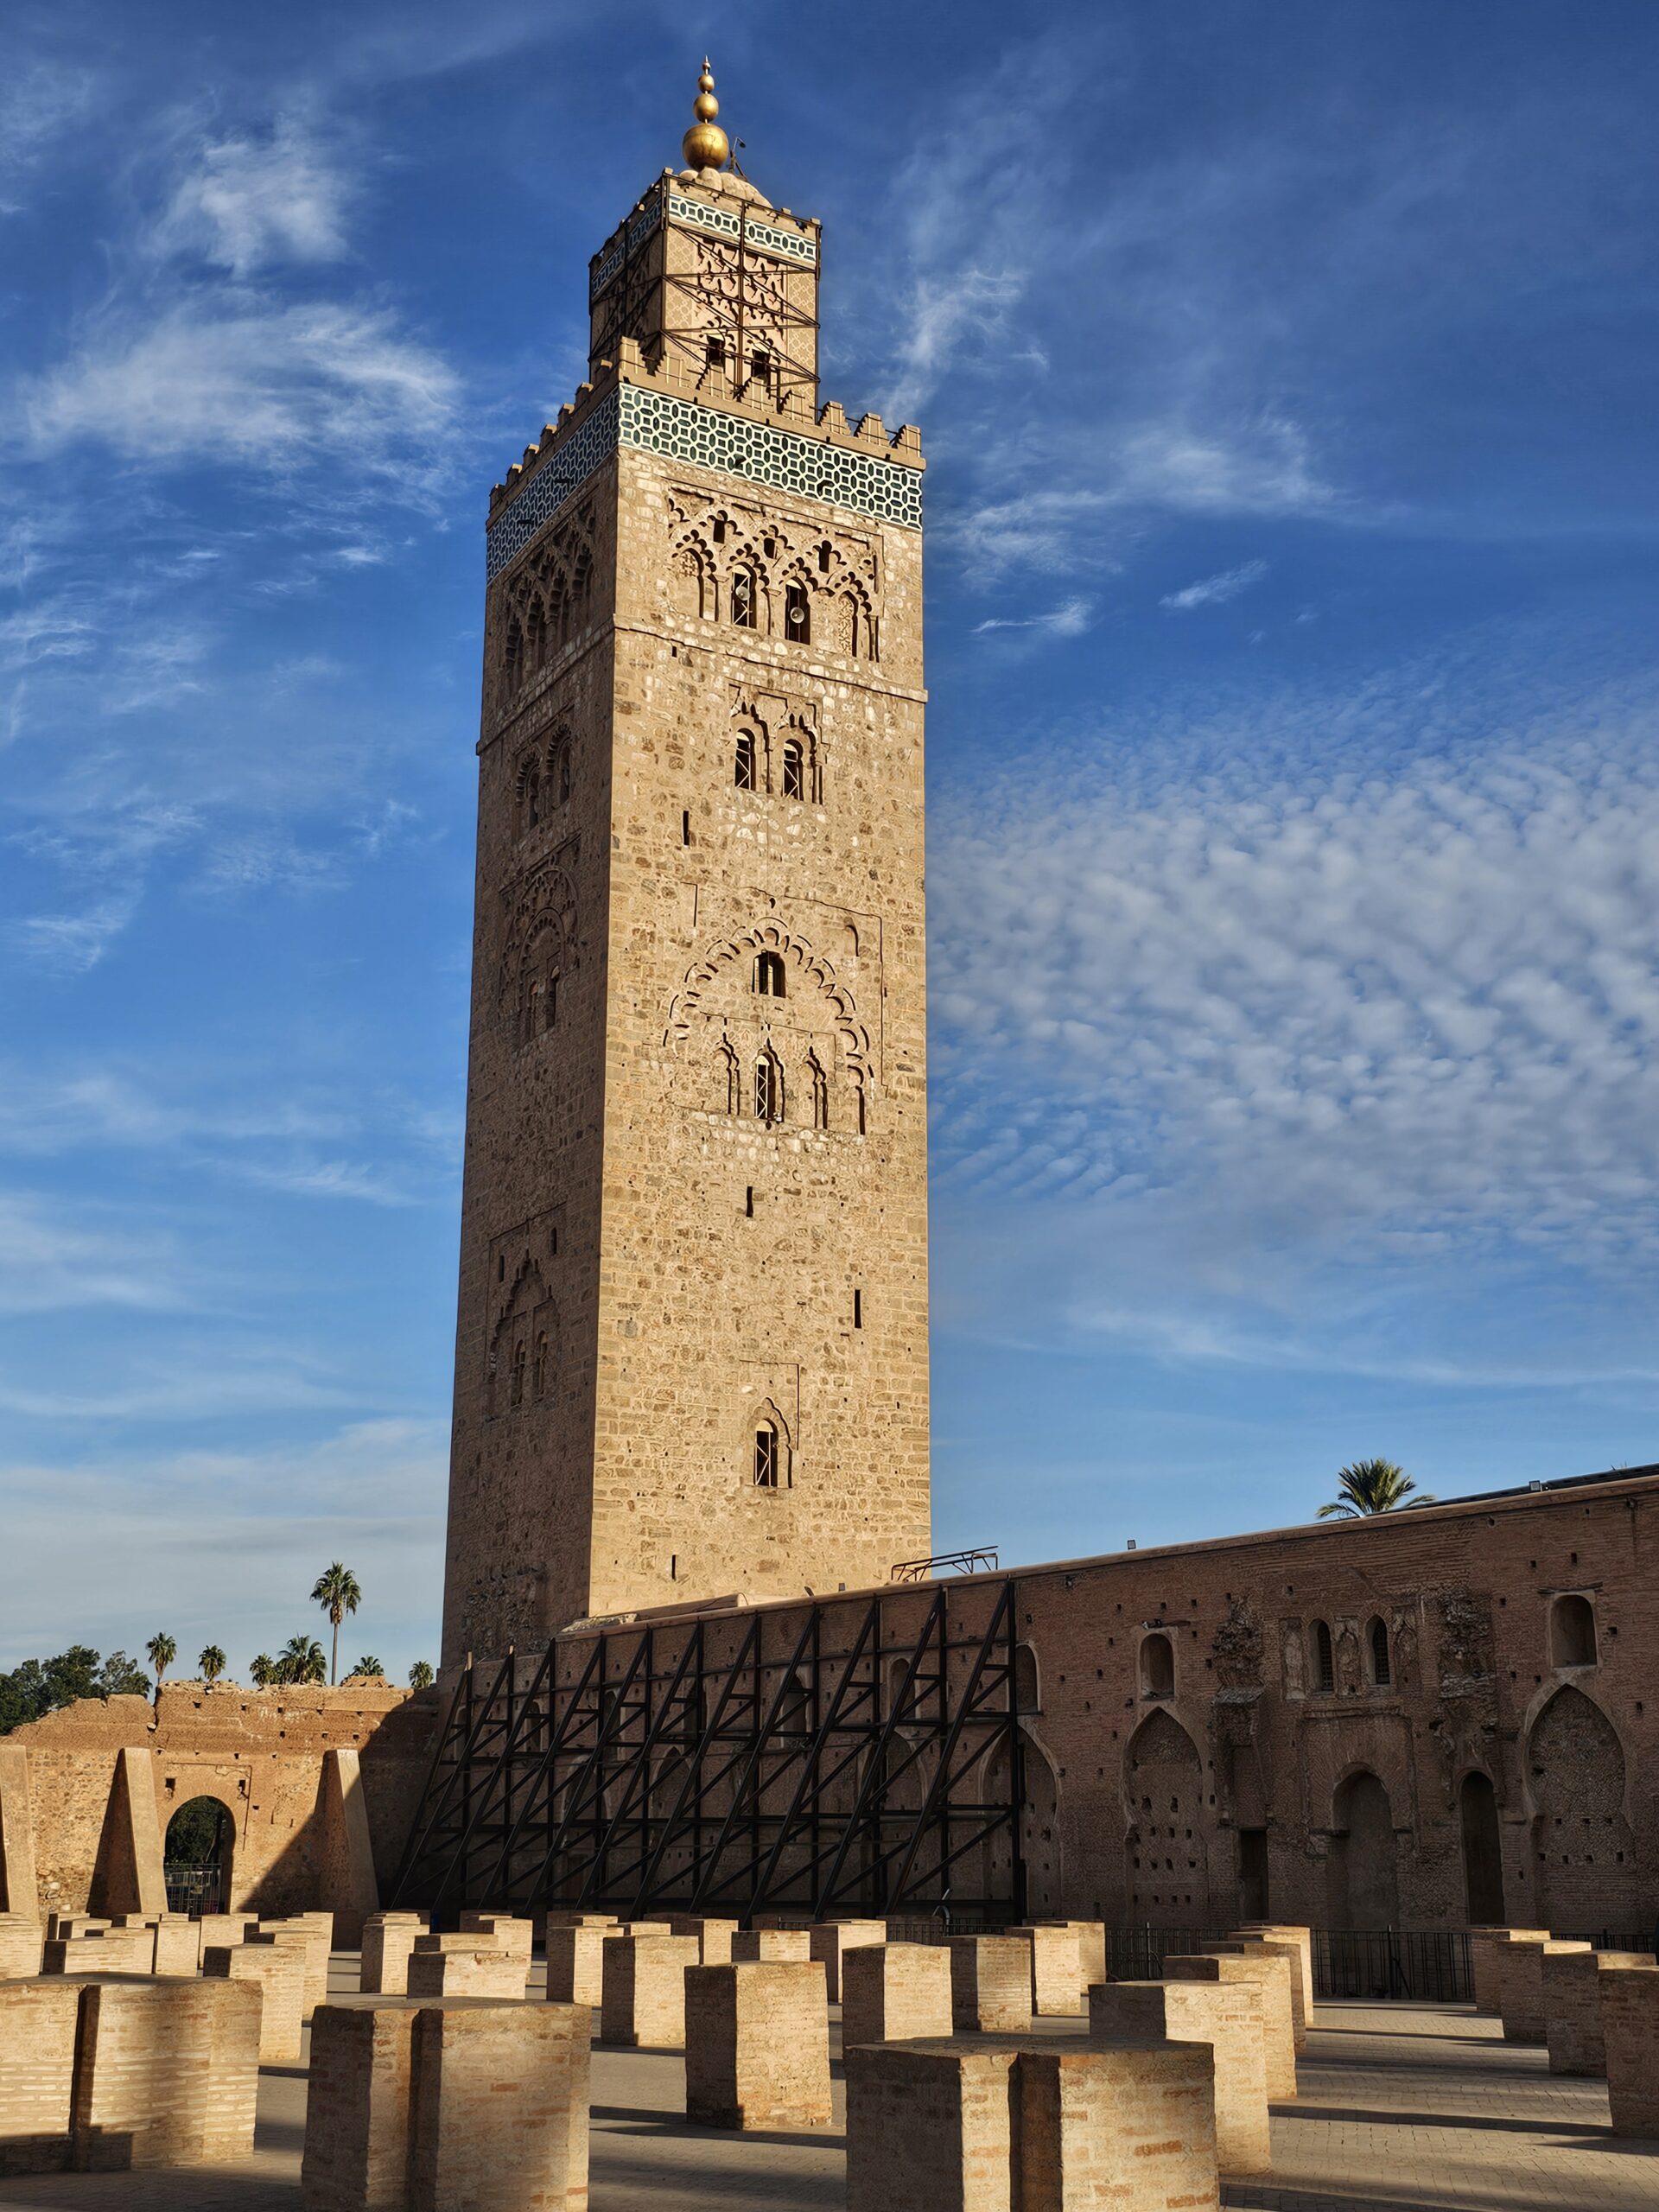 Sideview of the 12th century Koutoubia Mosque and its front yard with pillars, Marrakesh. Image by 360onhistory.com